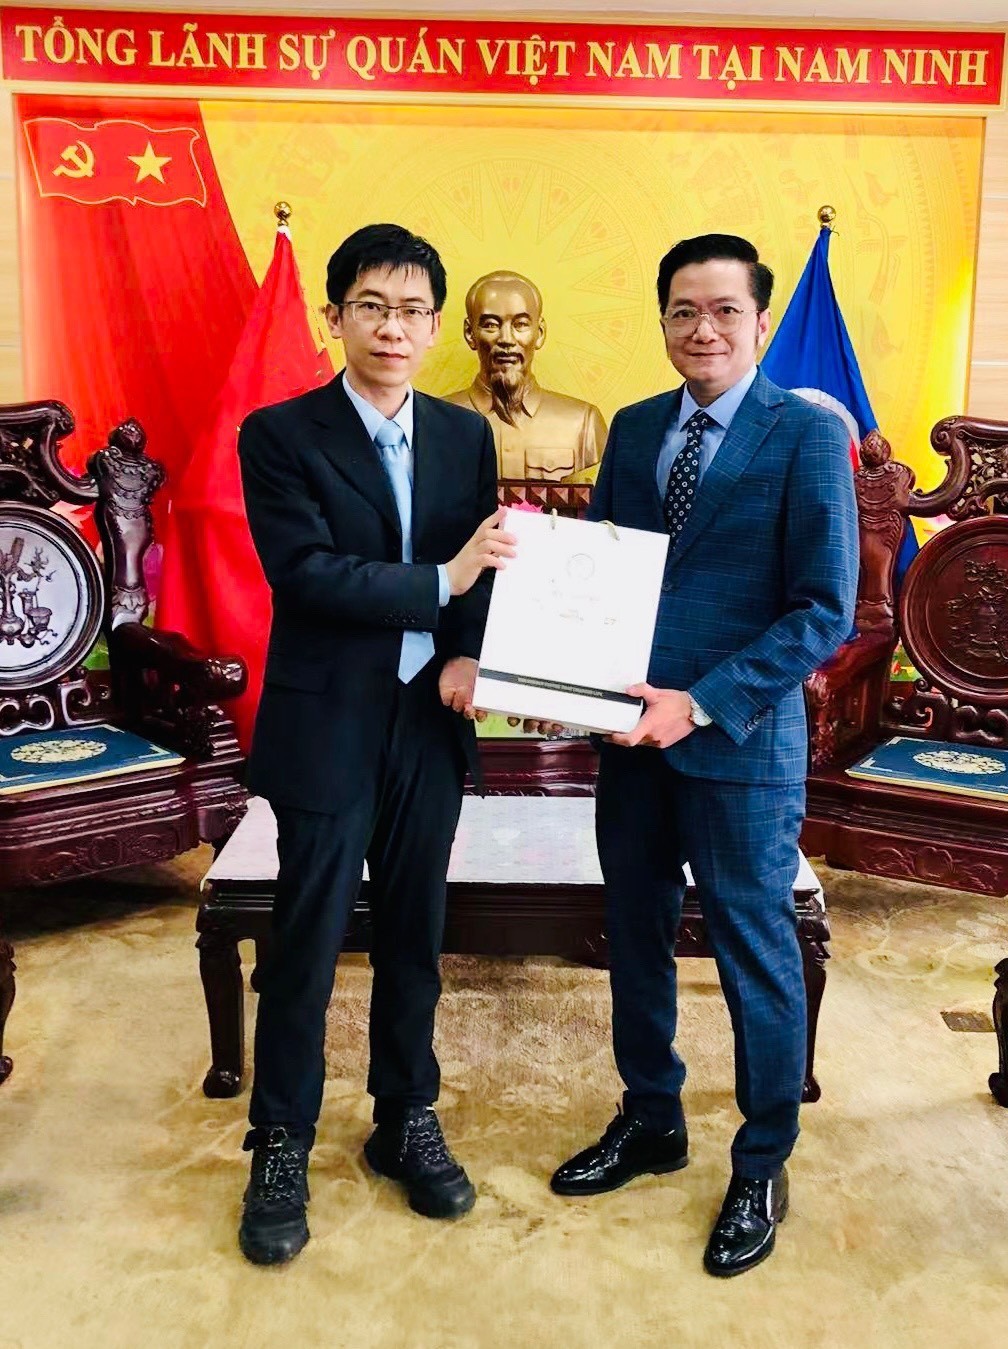 Strengthening Trade and Investment Promotion between Vietnam and Guangxi (China)